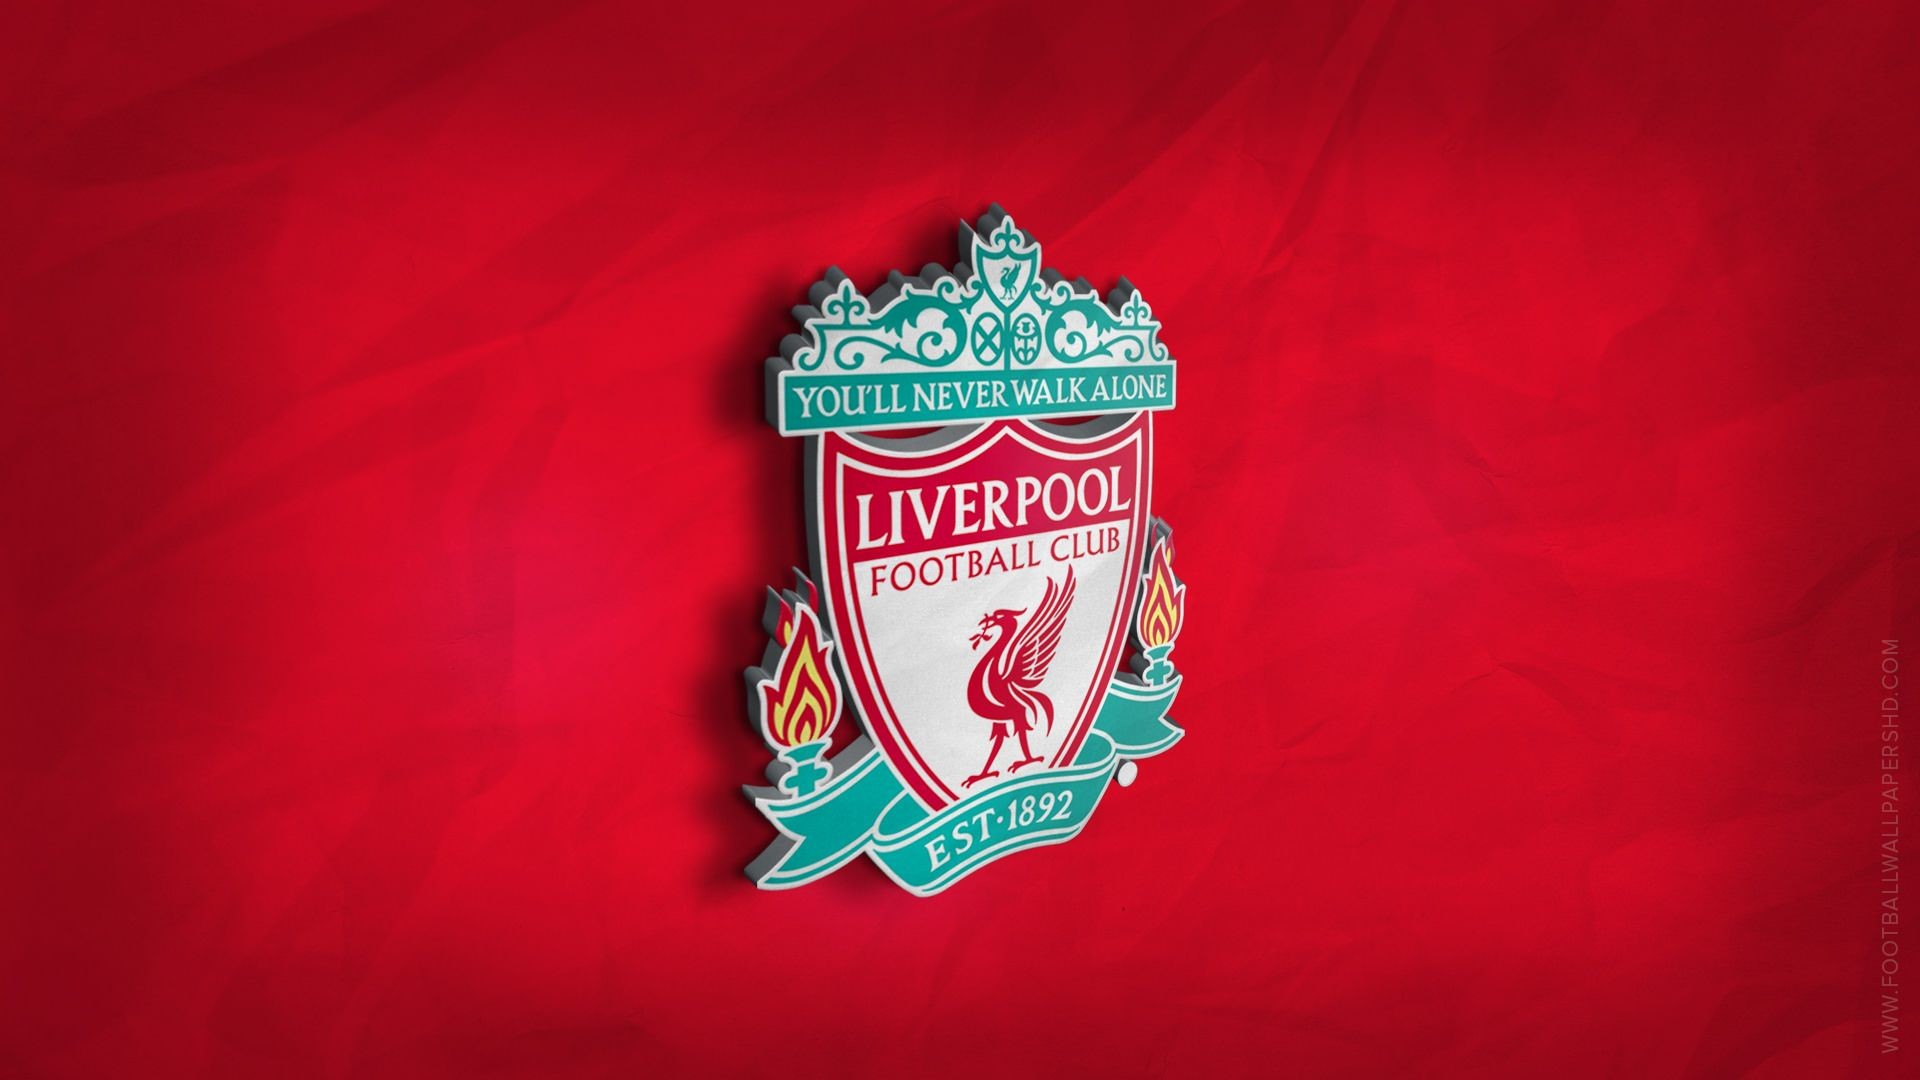 1920x1080 Here HDWallCentral offers a collection of images regarding LIVERPOOL  (ENGLISH PREMIER LEAGUE).